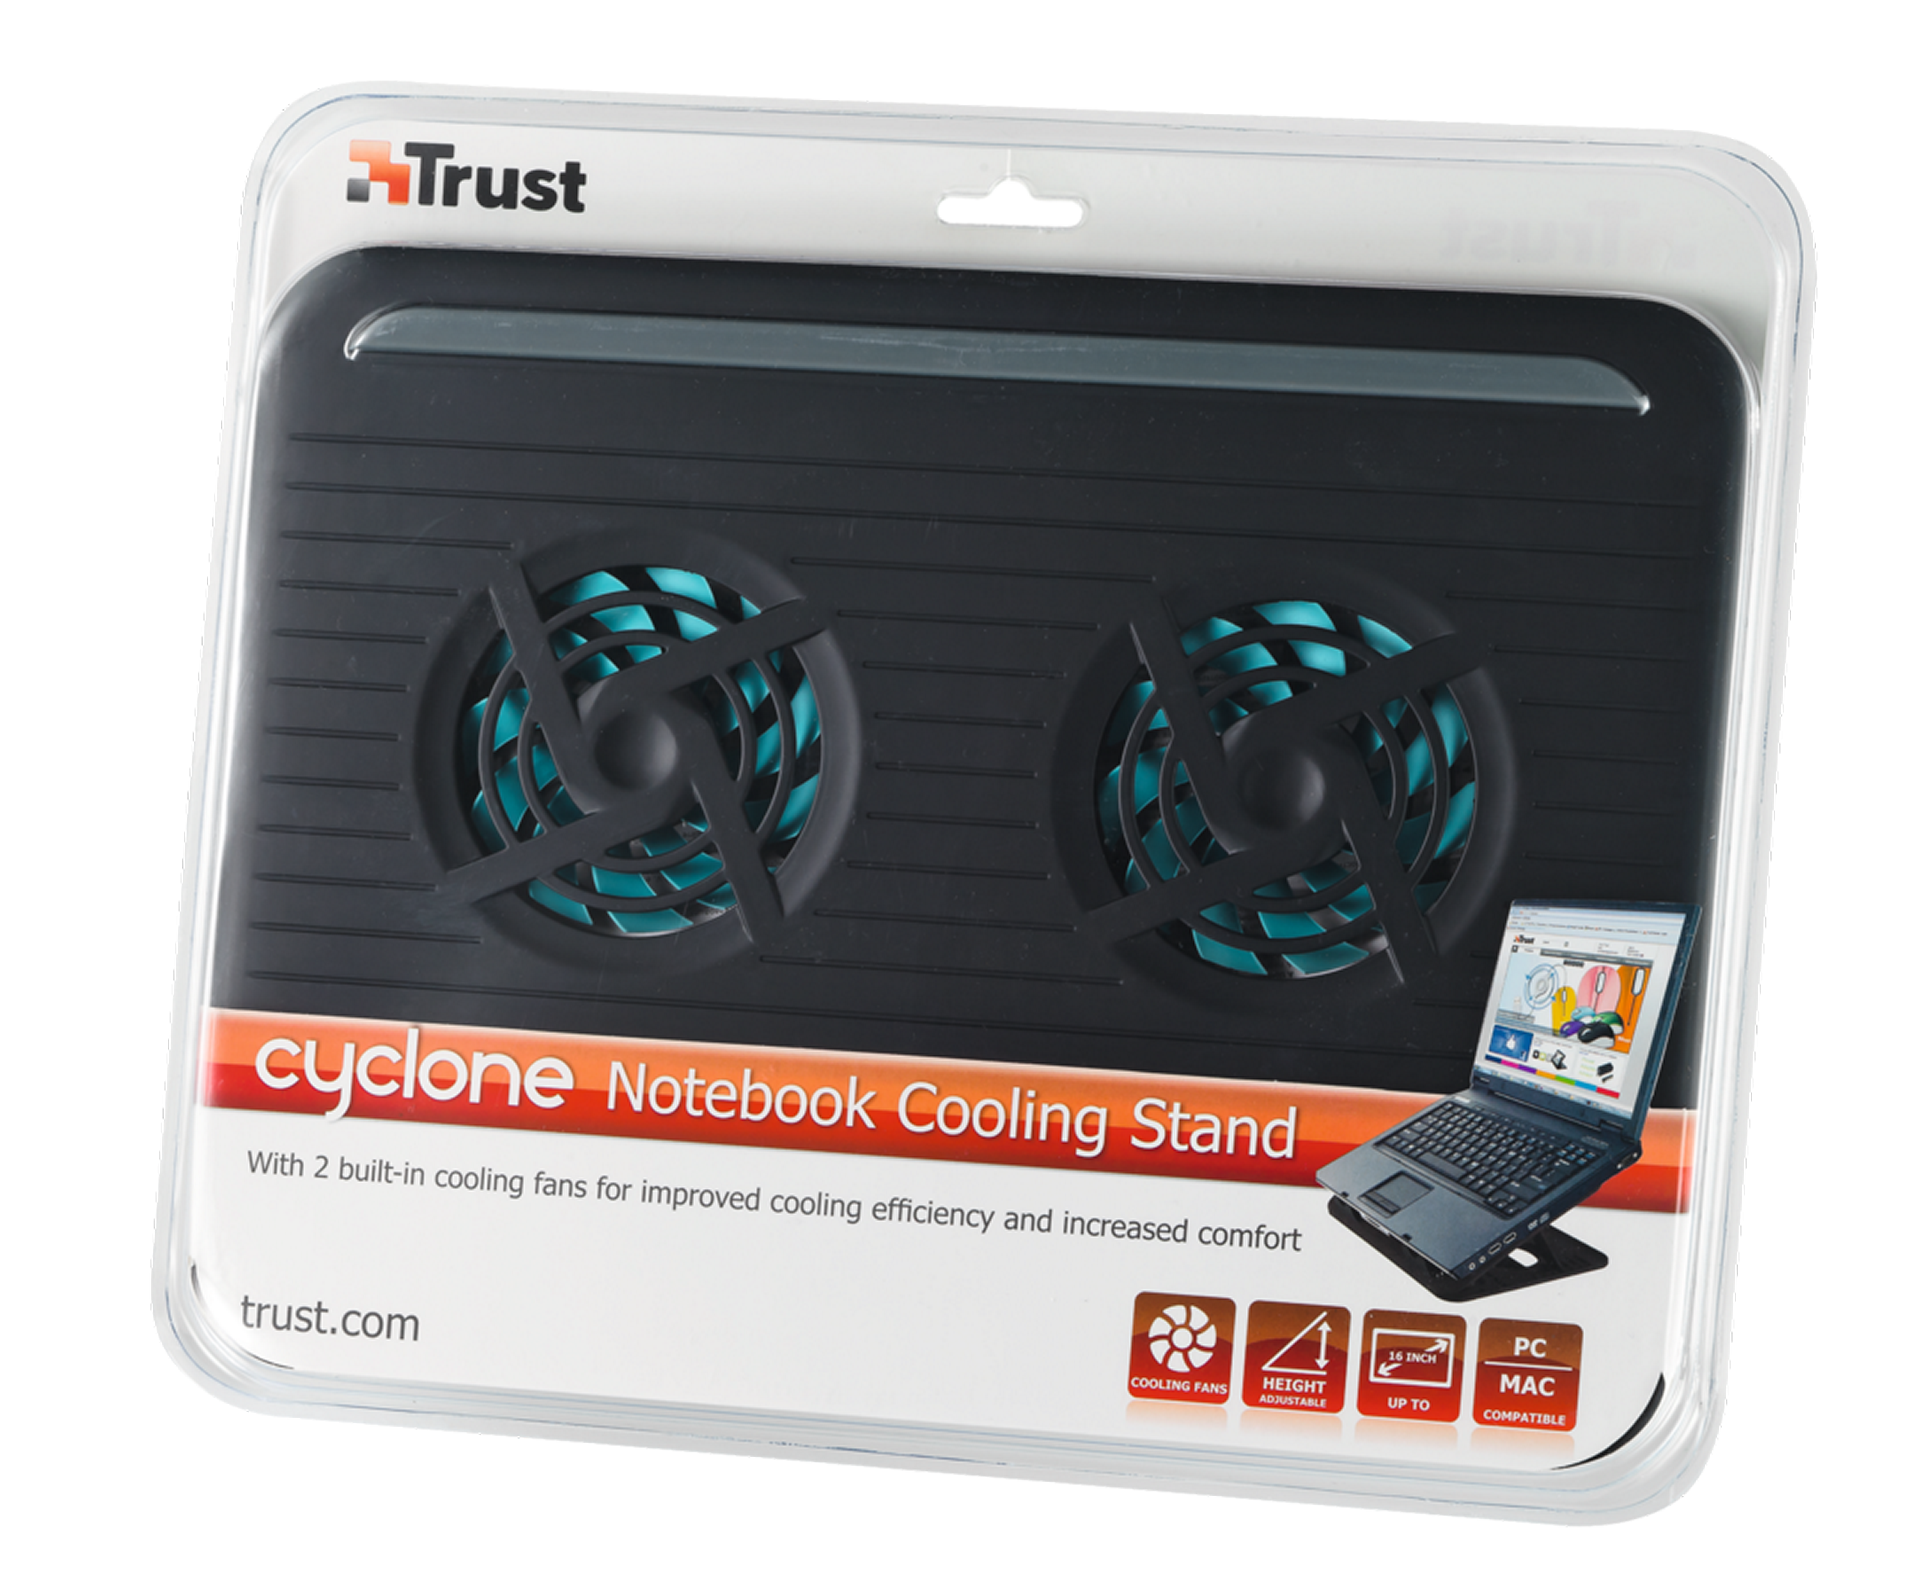 TRUST Cyclone Notebook Cooling Stand (17866)